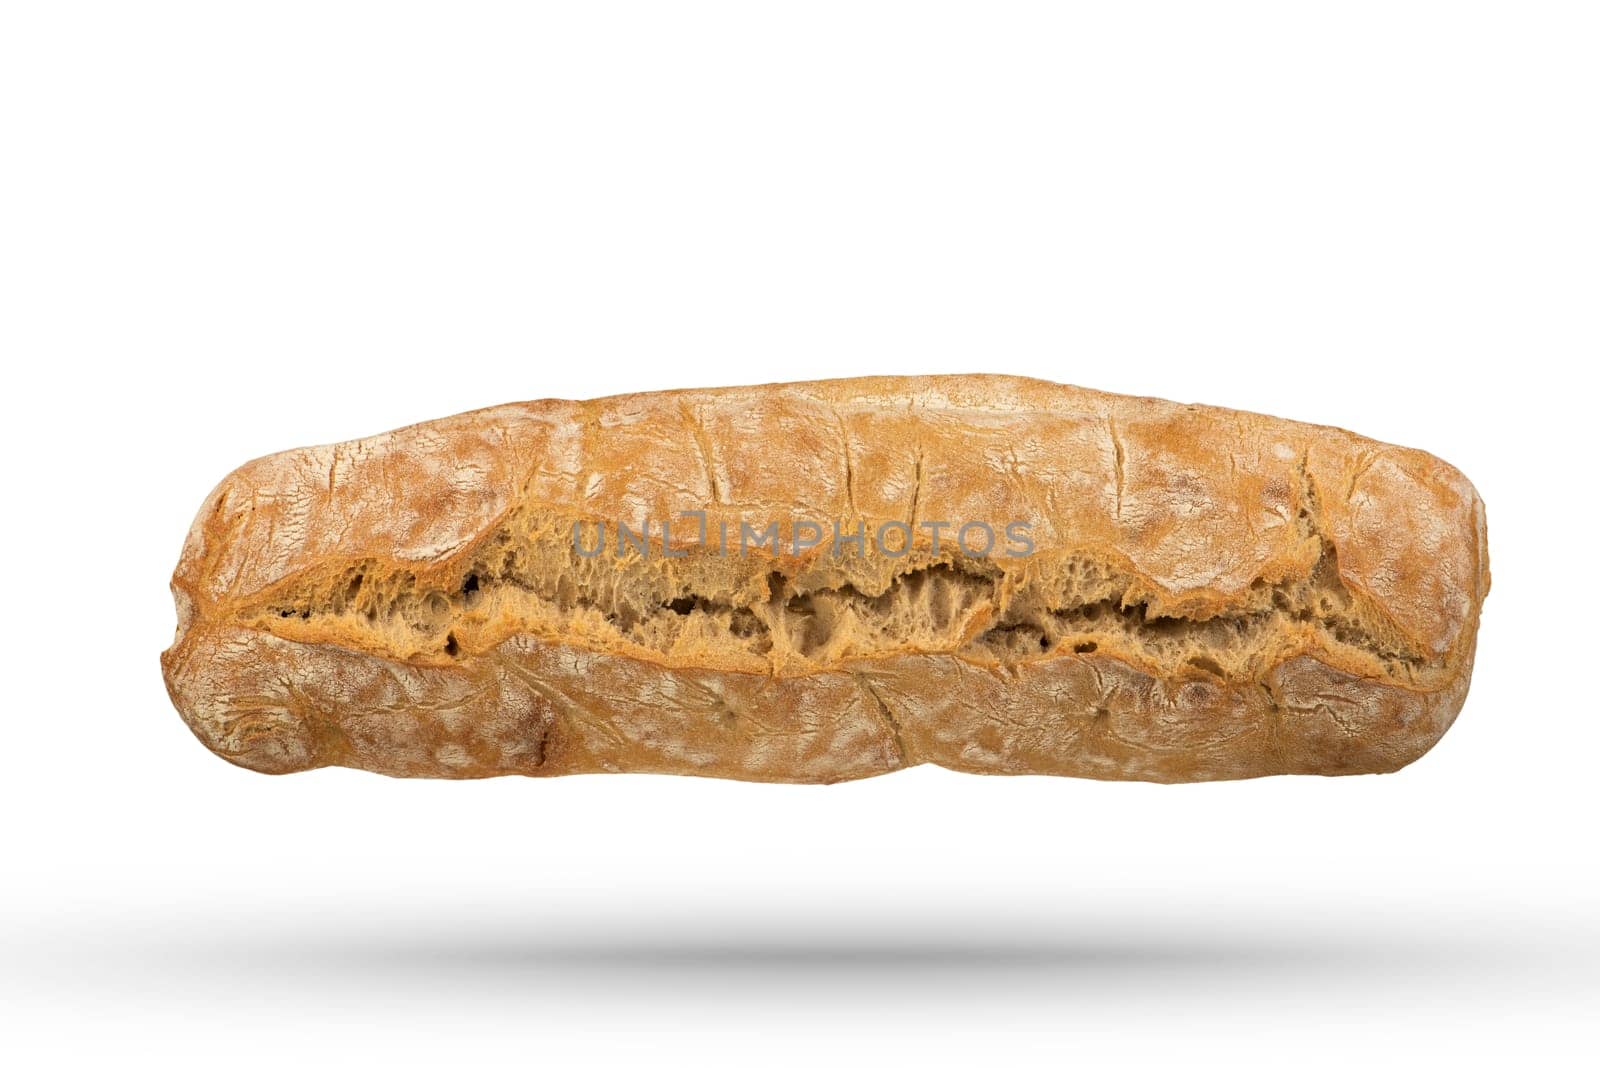 Loaf of Italian fresh ciabatta bread on a white isolated background. Loaf of bread isolate to insert into a design or project. Top view. by SERSOL